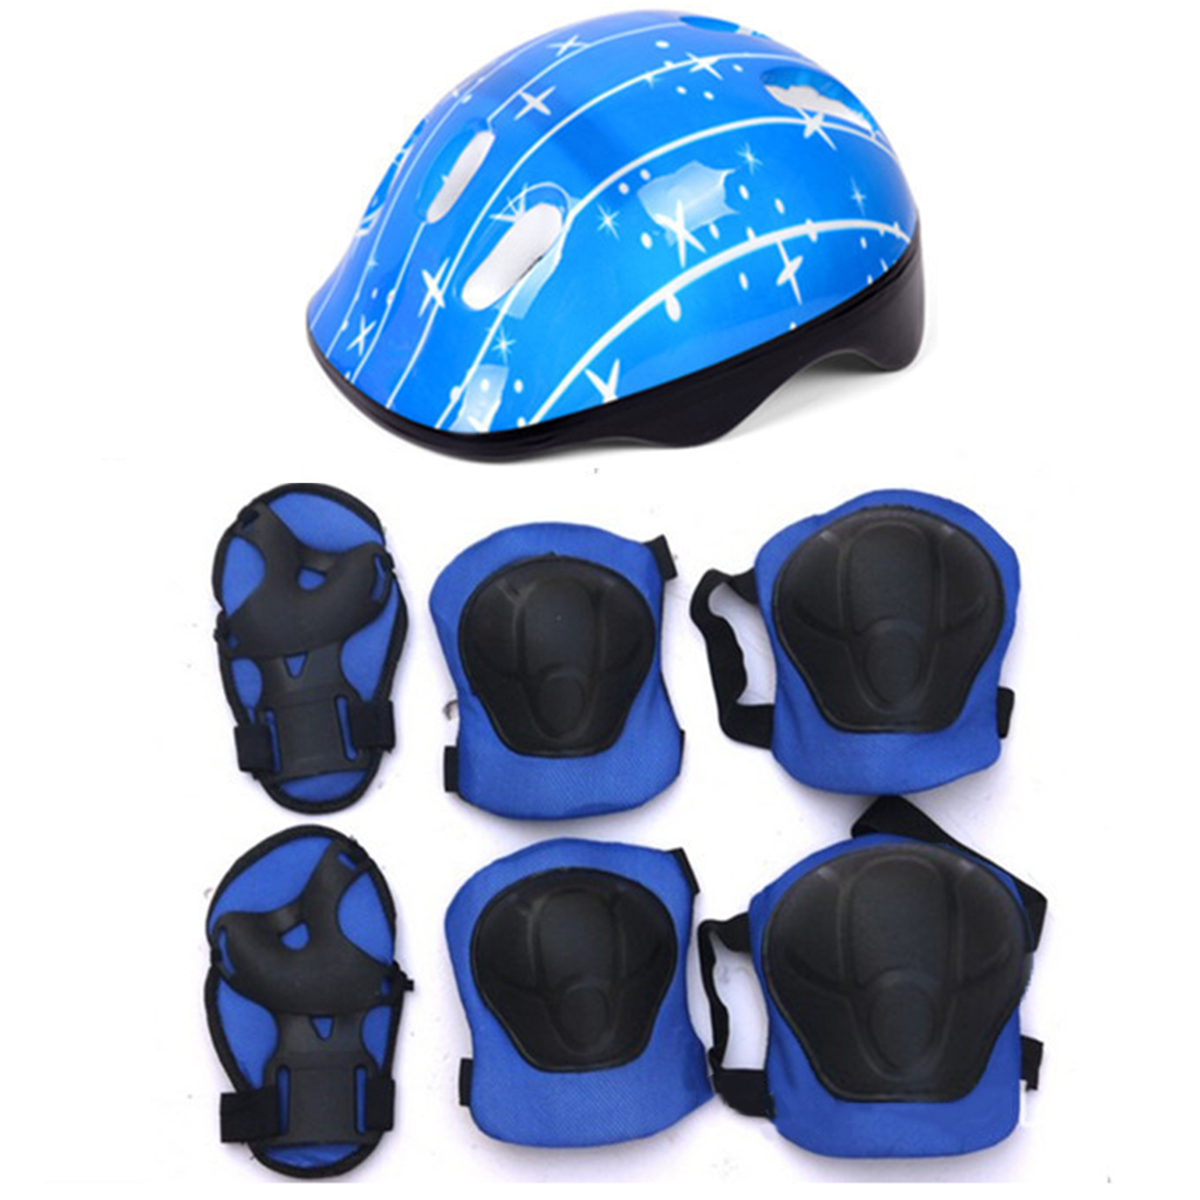 7-IN-1-Kidss-Balance-Bike-Helmet-Kits-With-Protect-Knee-Wrist-Elbow-Pads-Roller-Skating-Protective-E-1734300-3